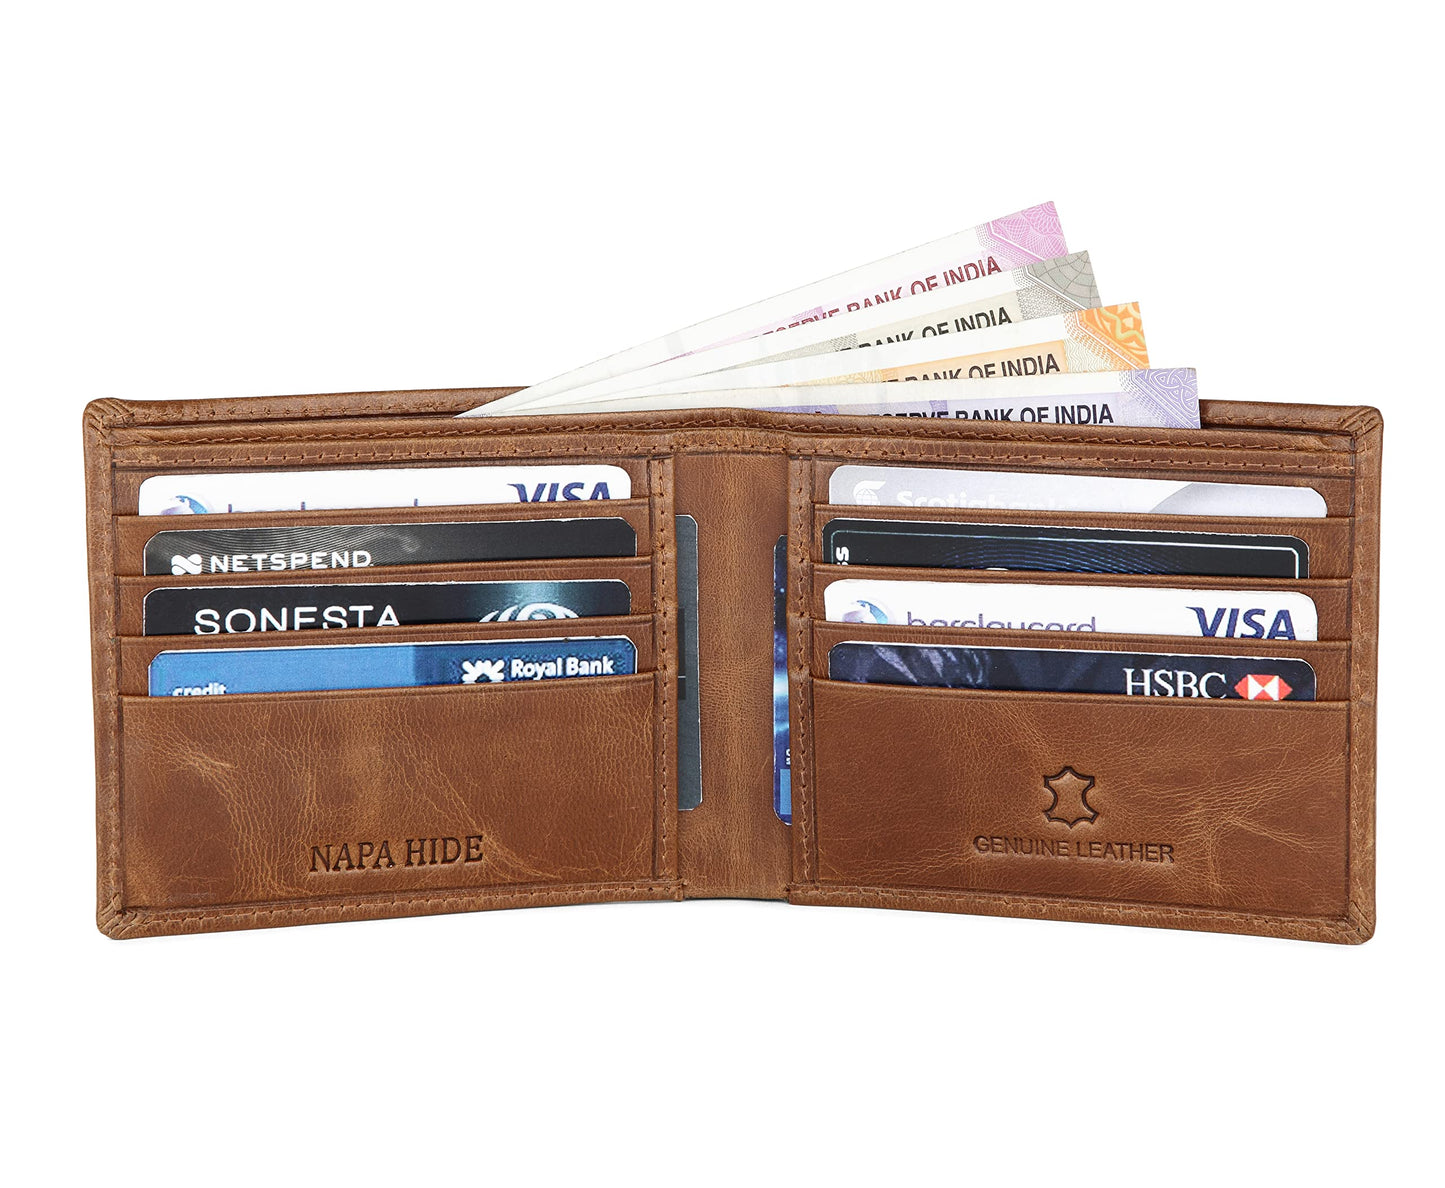 NAPA HIDE Leather Wallet for Men I Handcrafted I Credit/Debit Card Slots I 2 Currency Compartments I 2 Secret Compartments (Tan Crunch) - Blossom Mantra